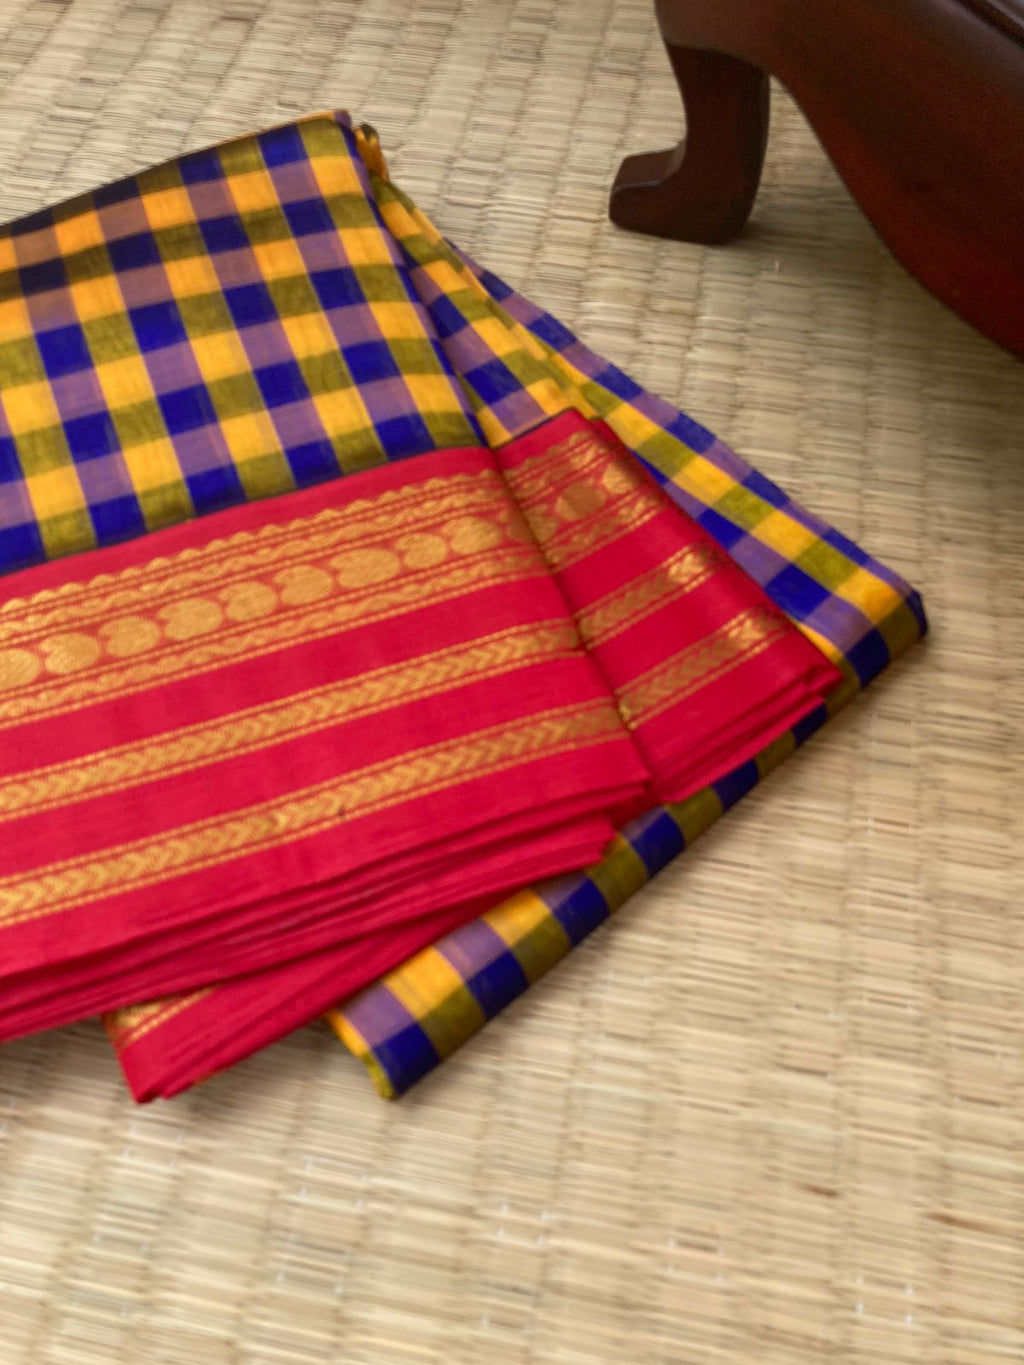 Paalum Palamum Kattams Korvai Silk Cottons - mustard and blue chex with red borders